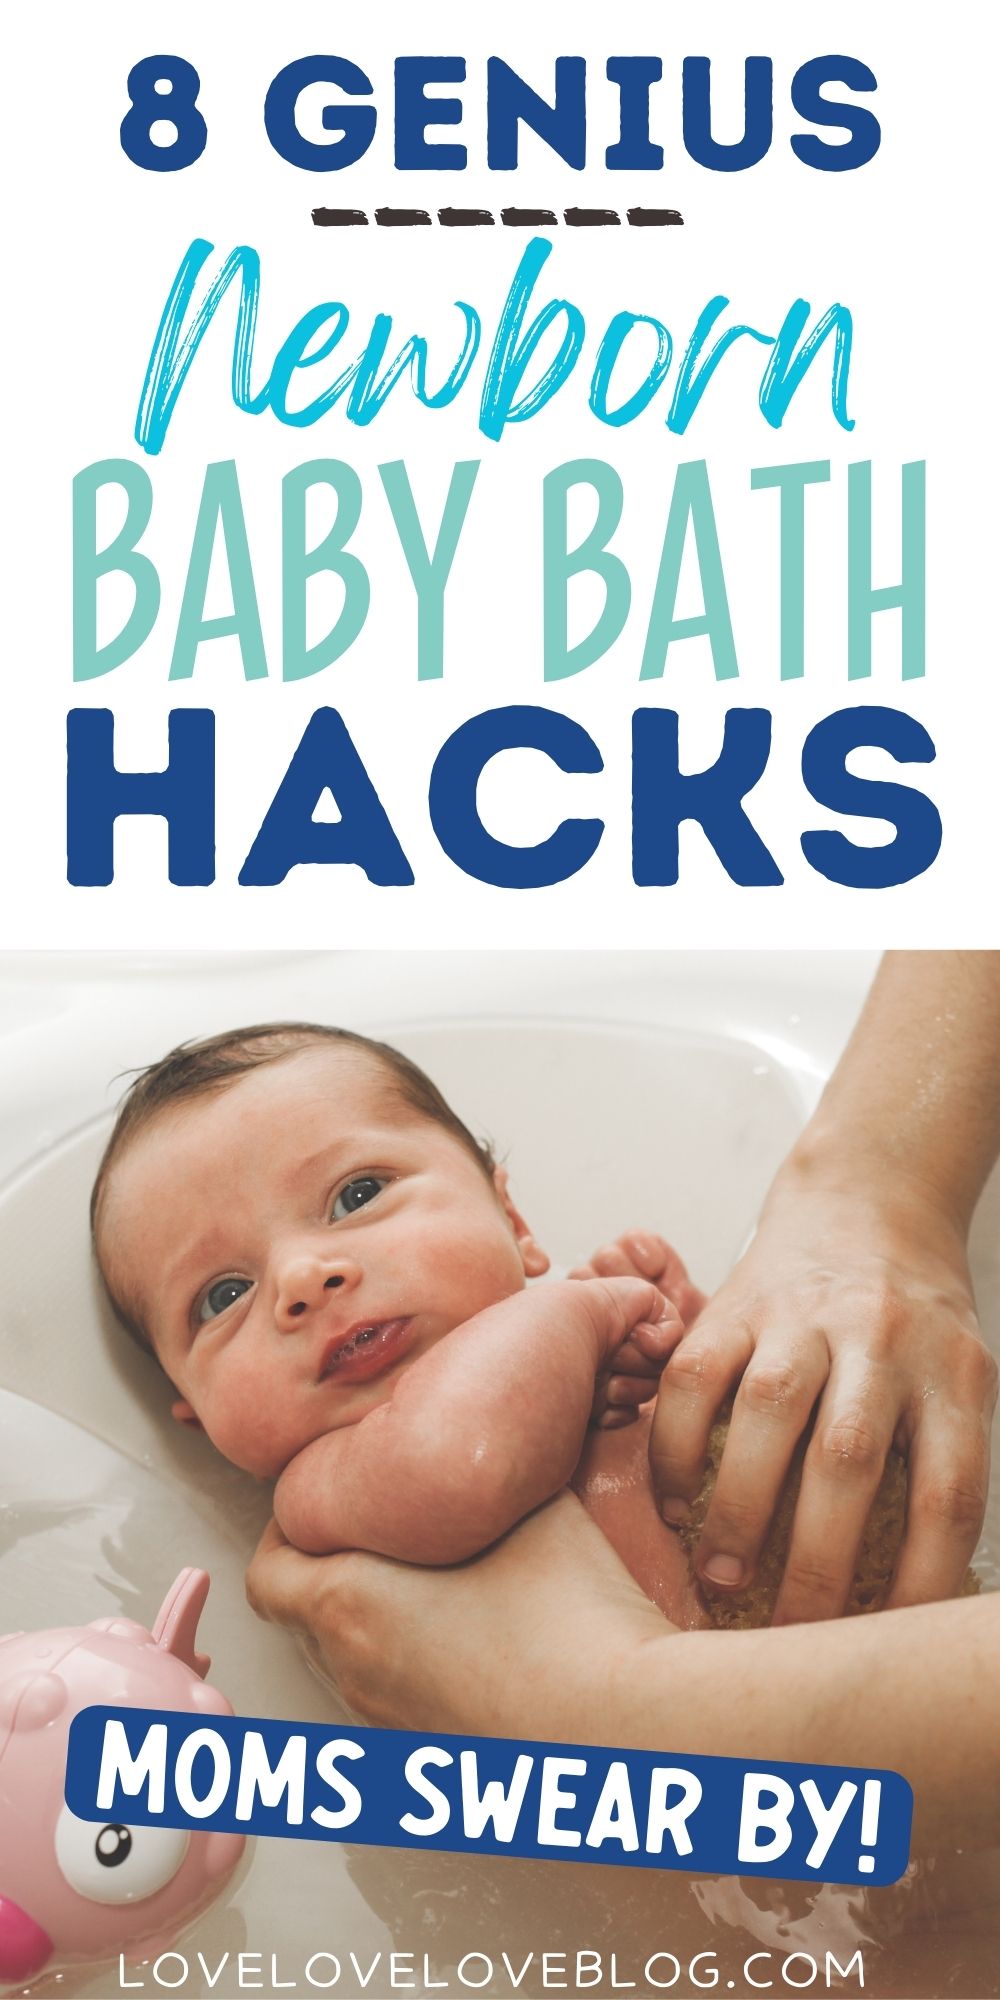 Pinterest graphic with text that reads "8 Genius Newborn Baby Bath Hacks Moms Swear By" and a baby in a bathtub.